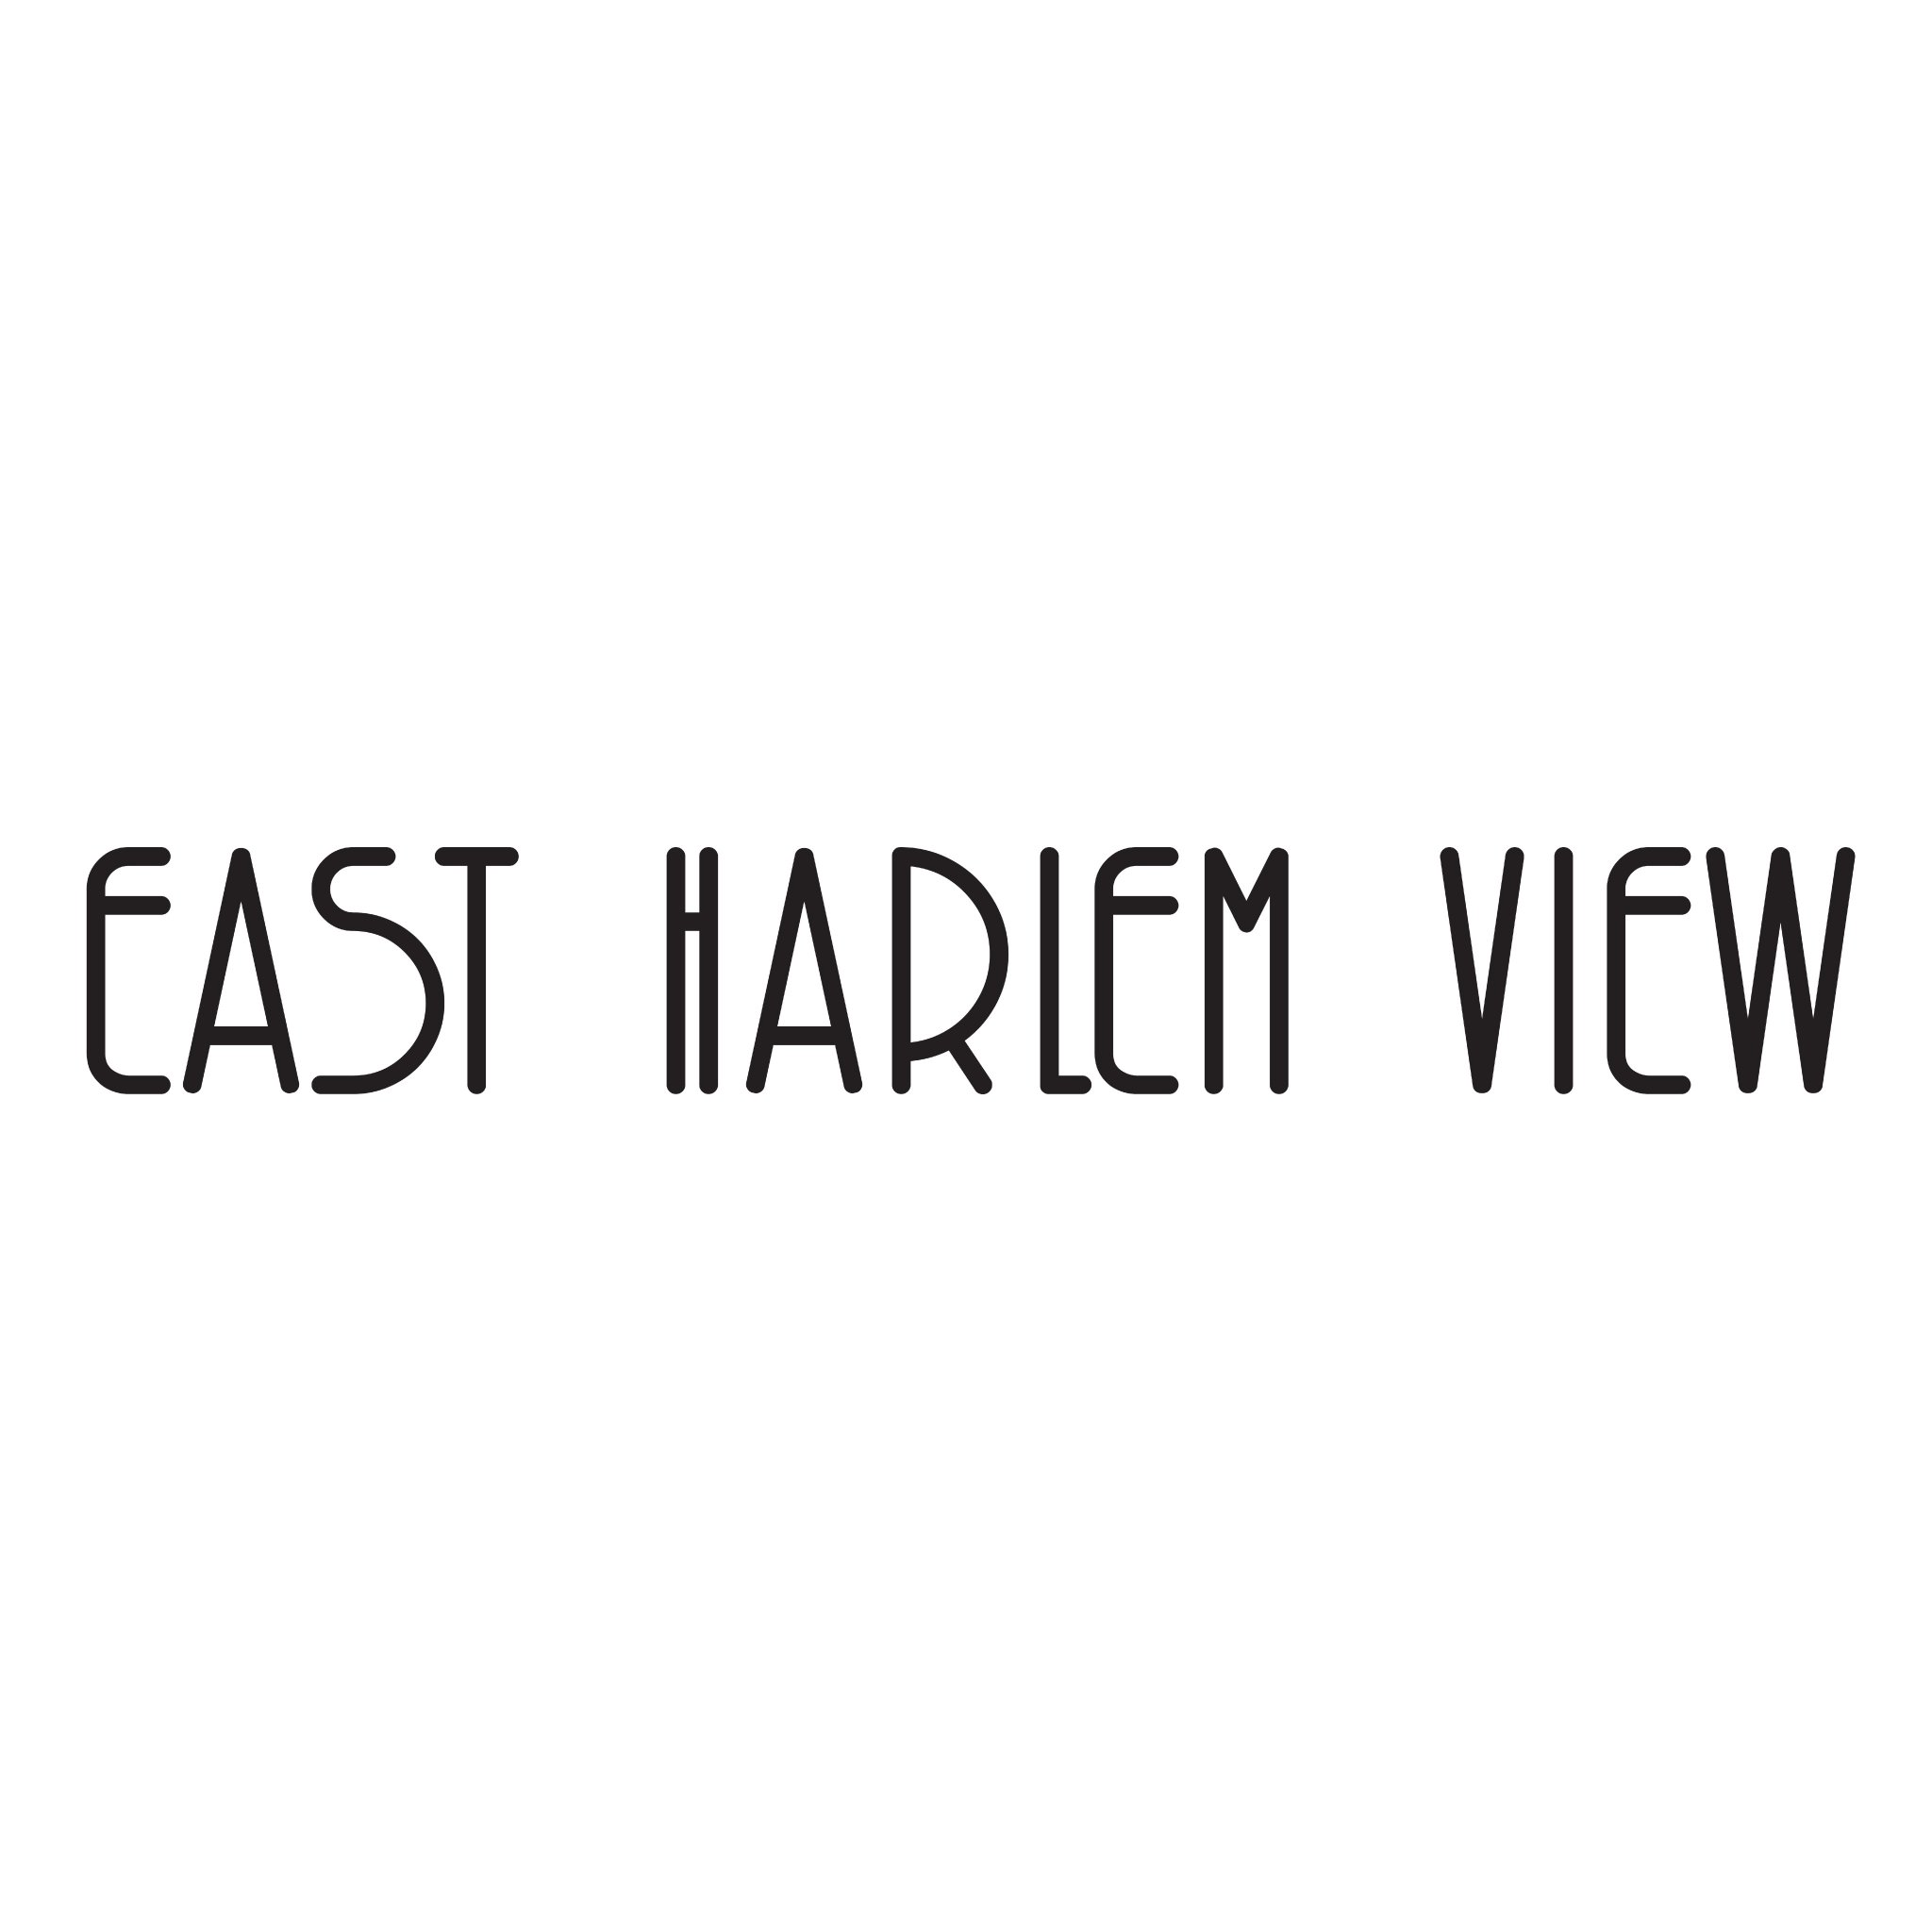 The East Harlem View is the blog for living, experiencing and loving East Harlem.